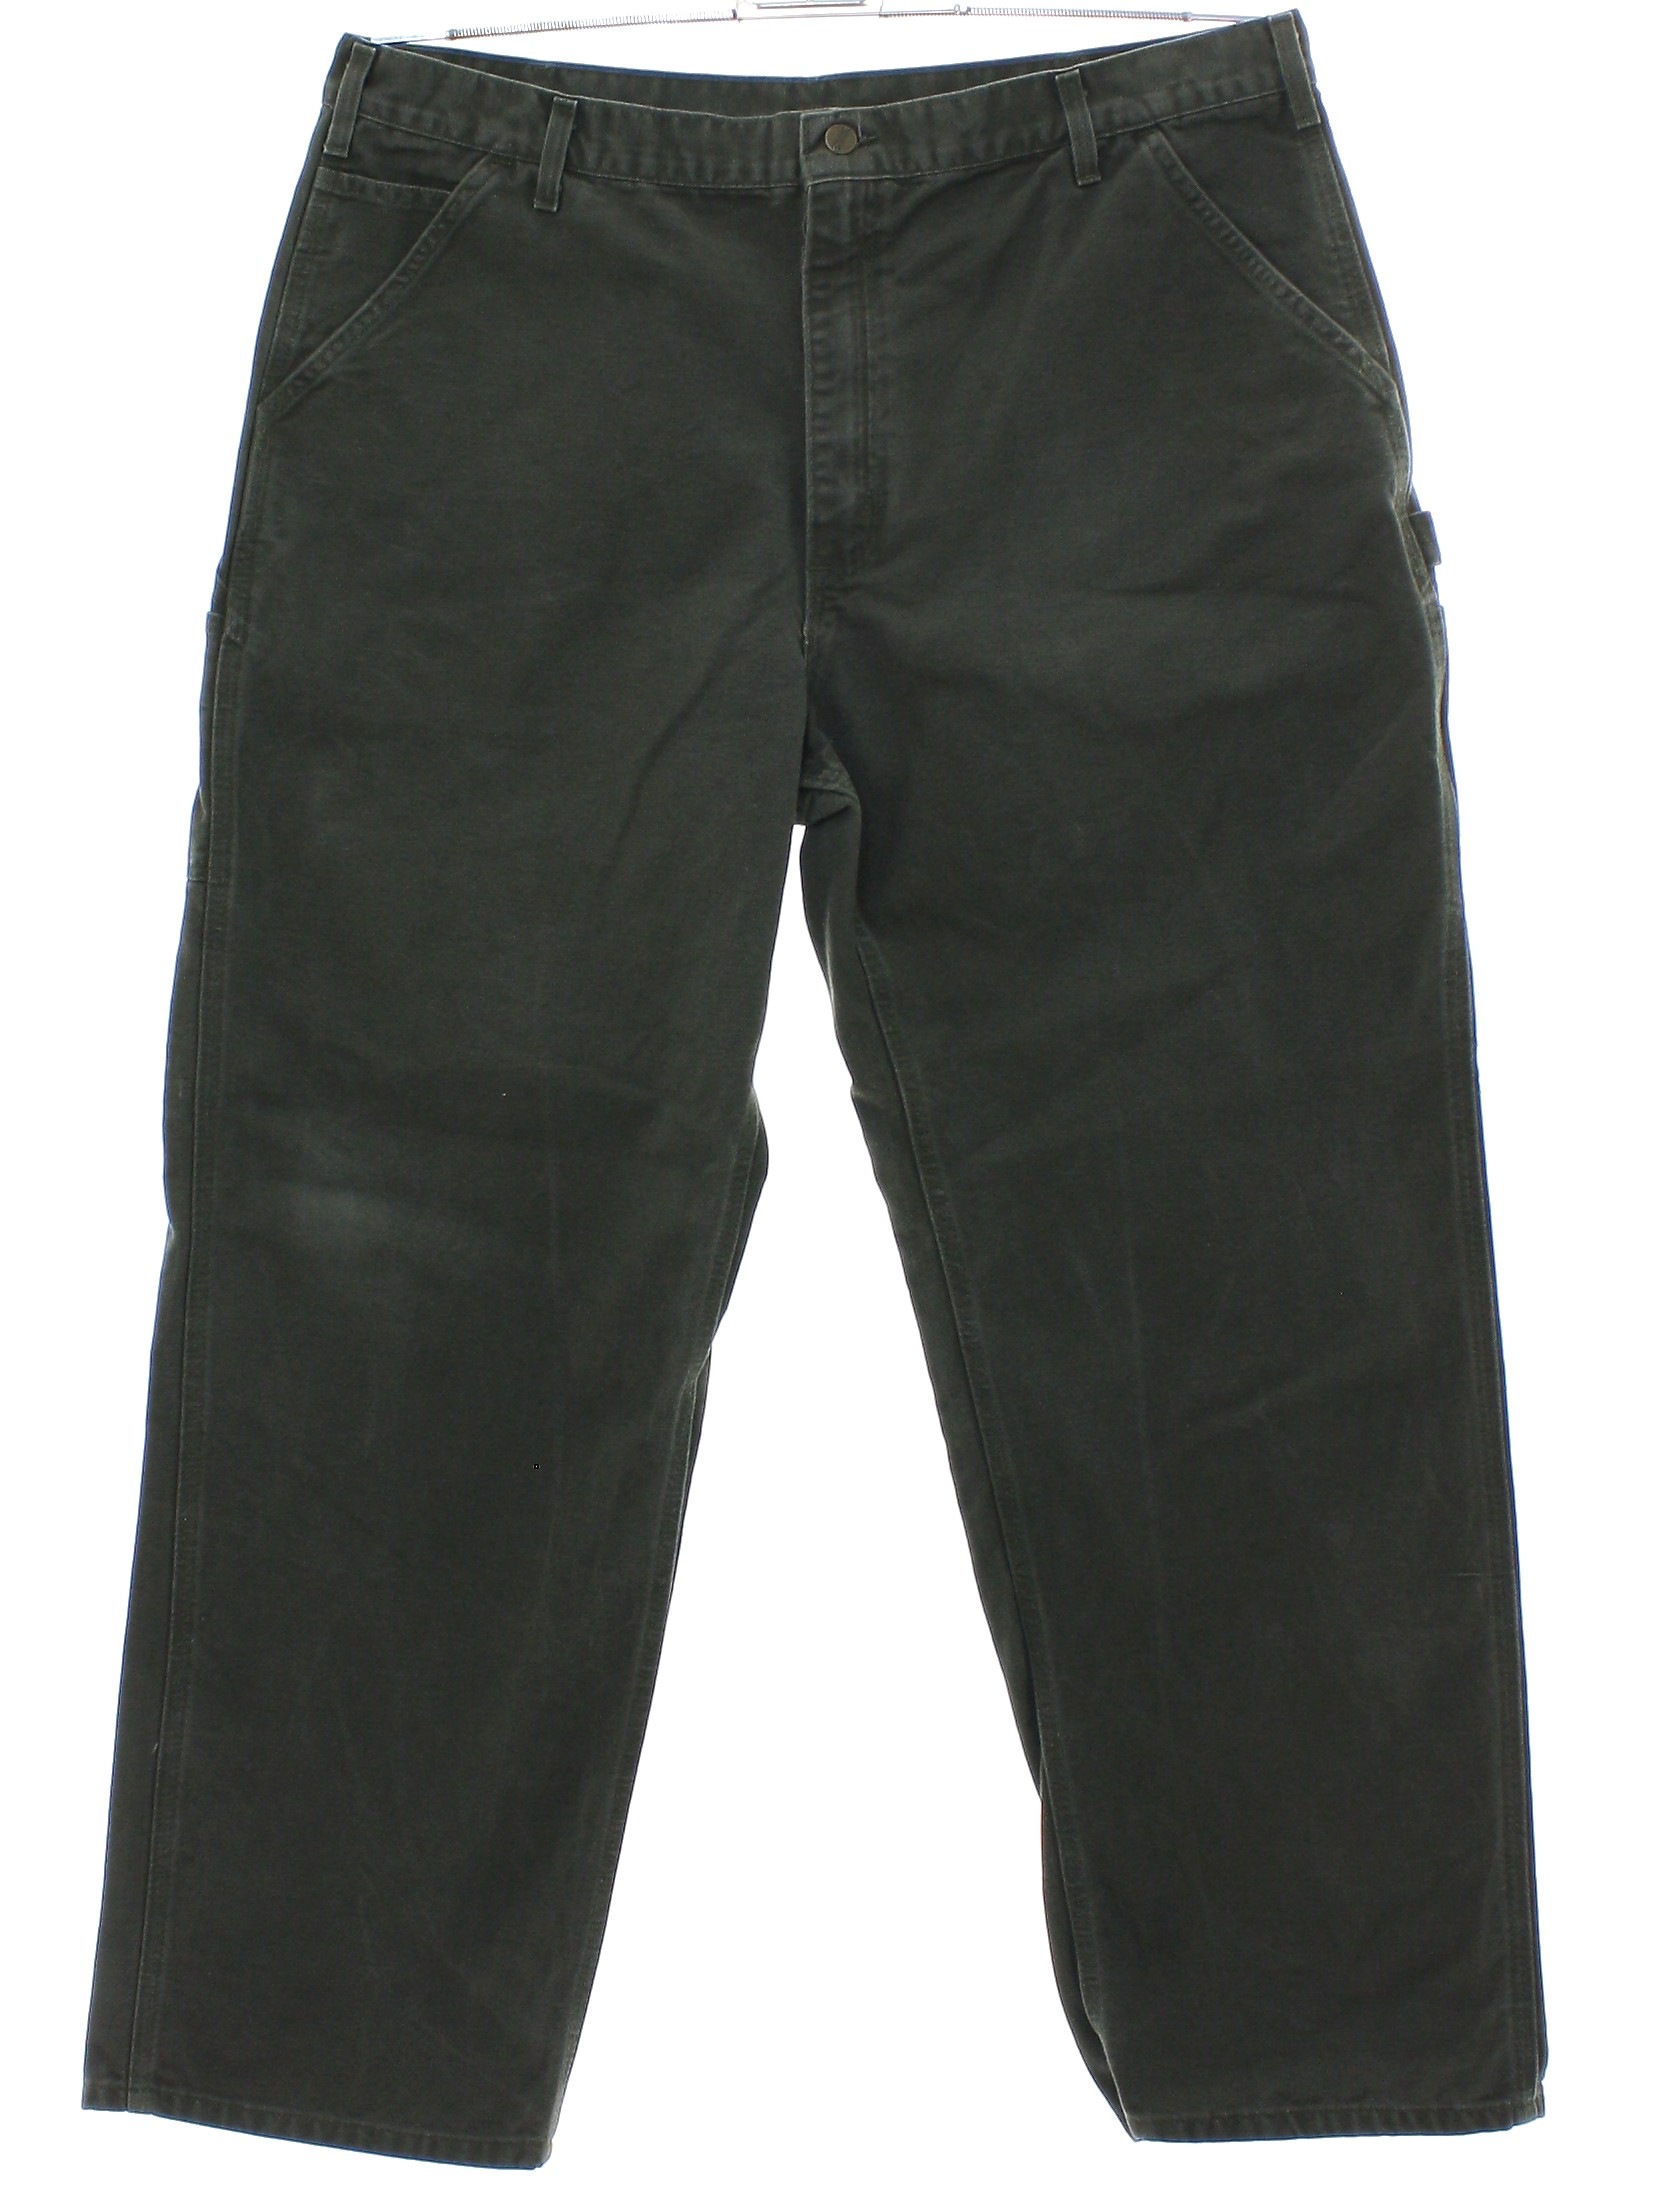 90's Vintage Pants: 90s -Carhartt, assembled in Mexico- Mens olive drab ...